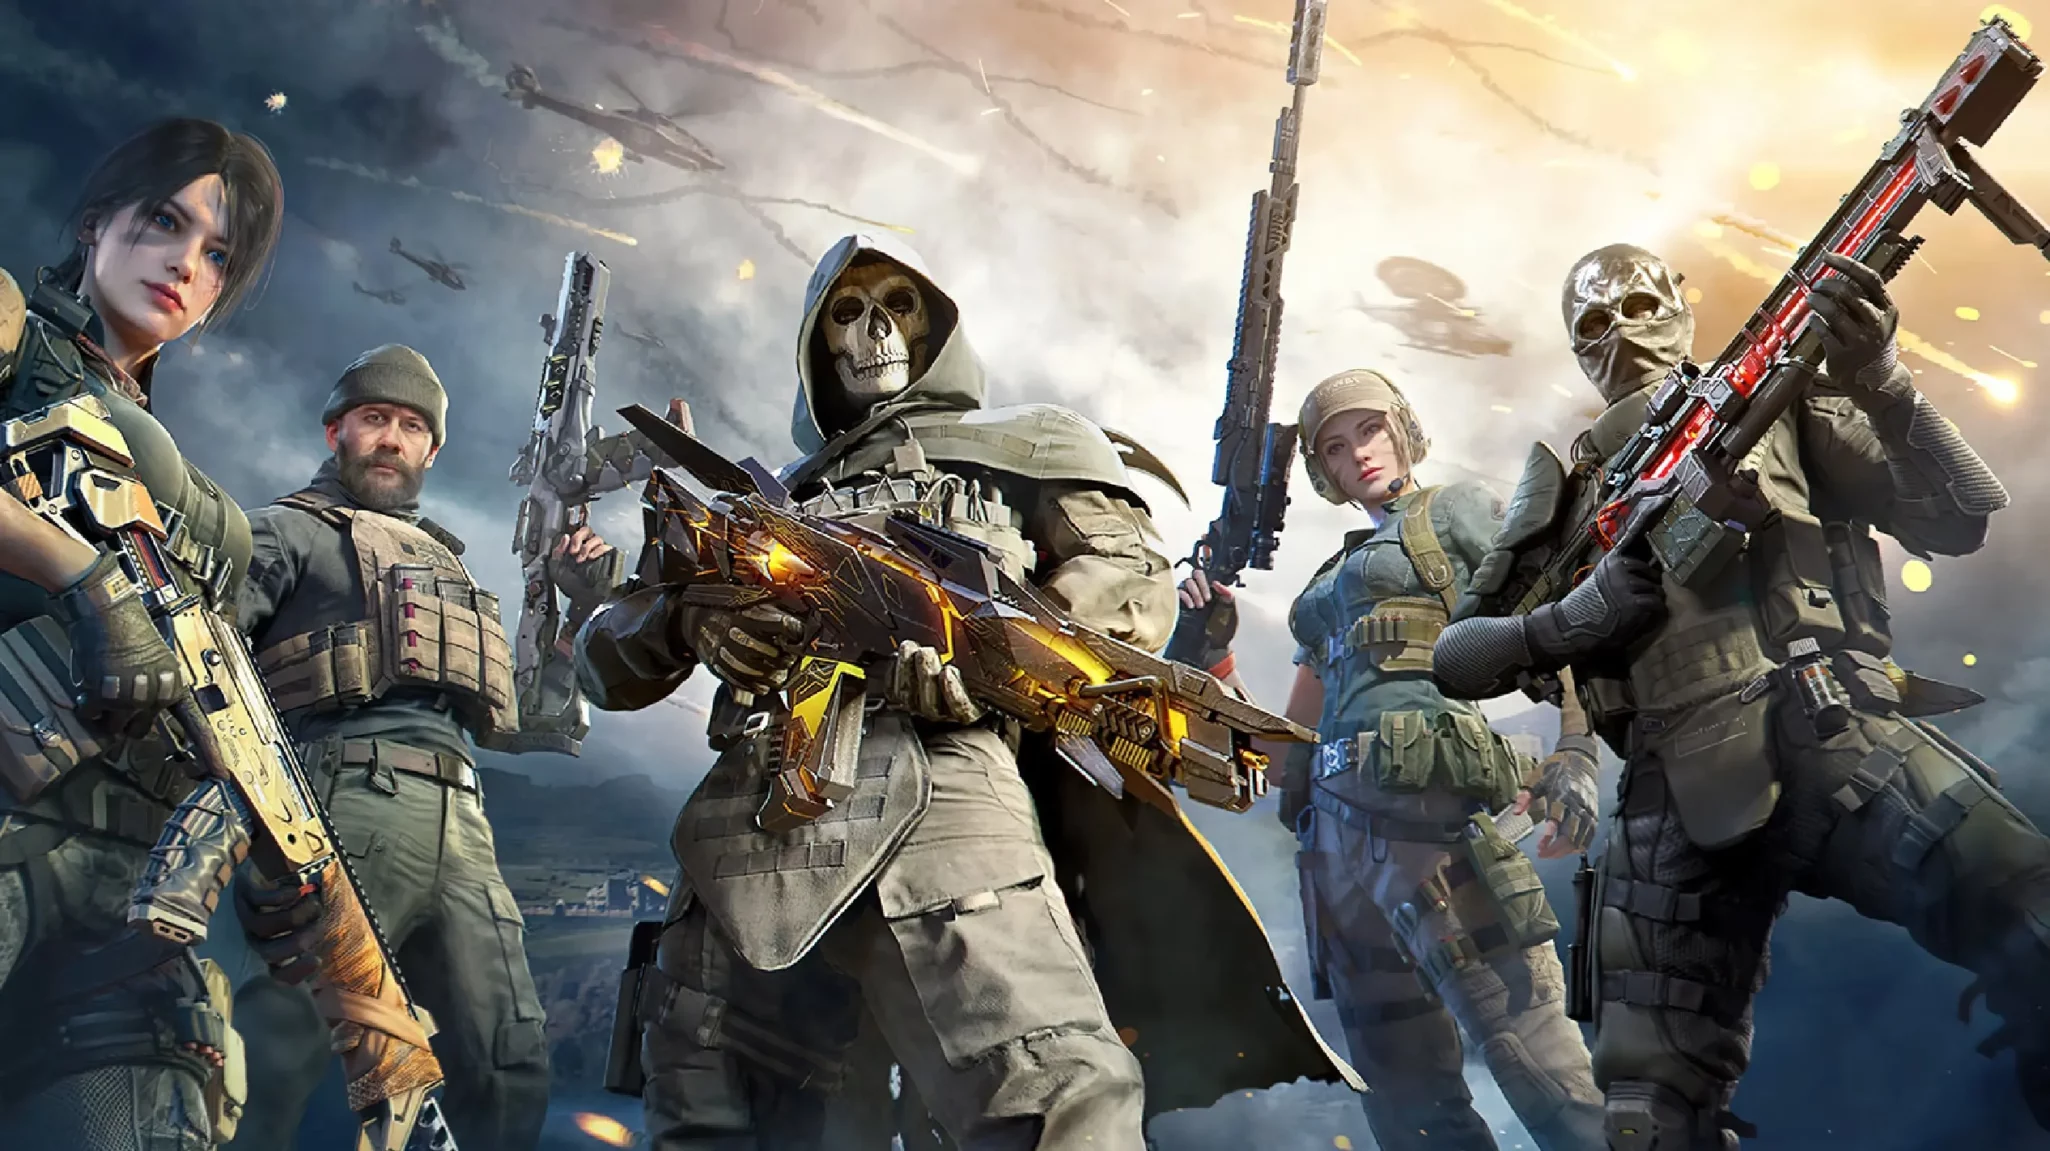 COD: Warzone Mobile will release in May 2023 